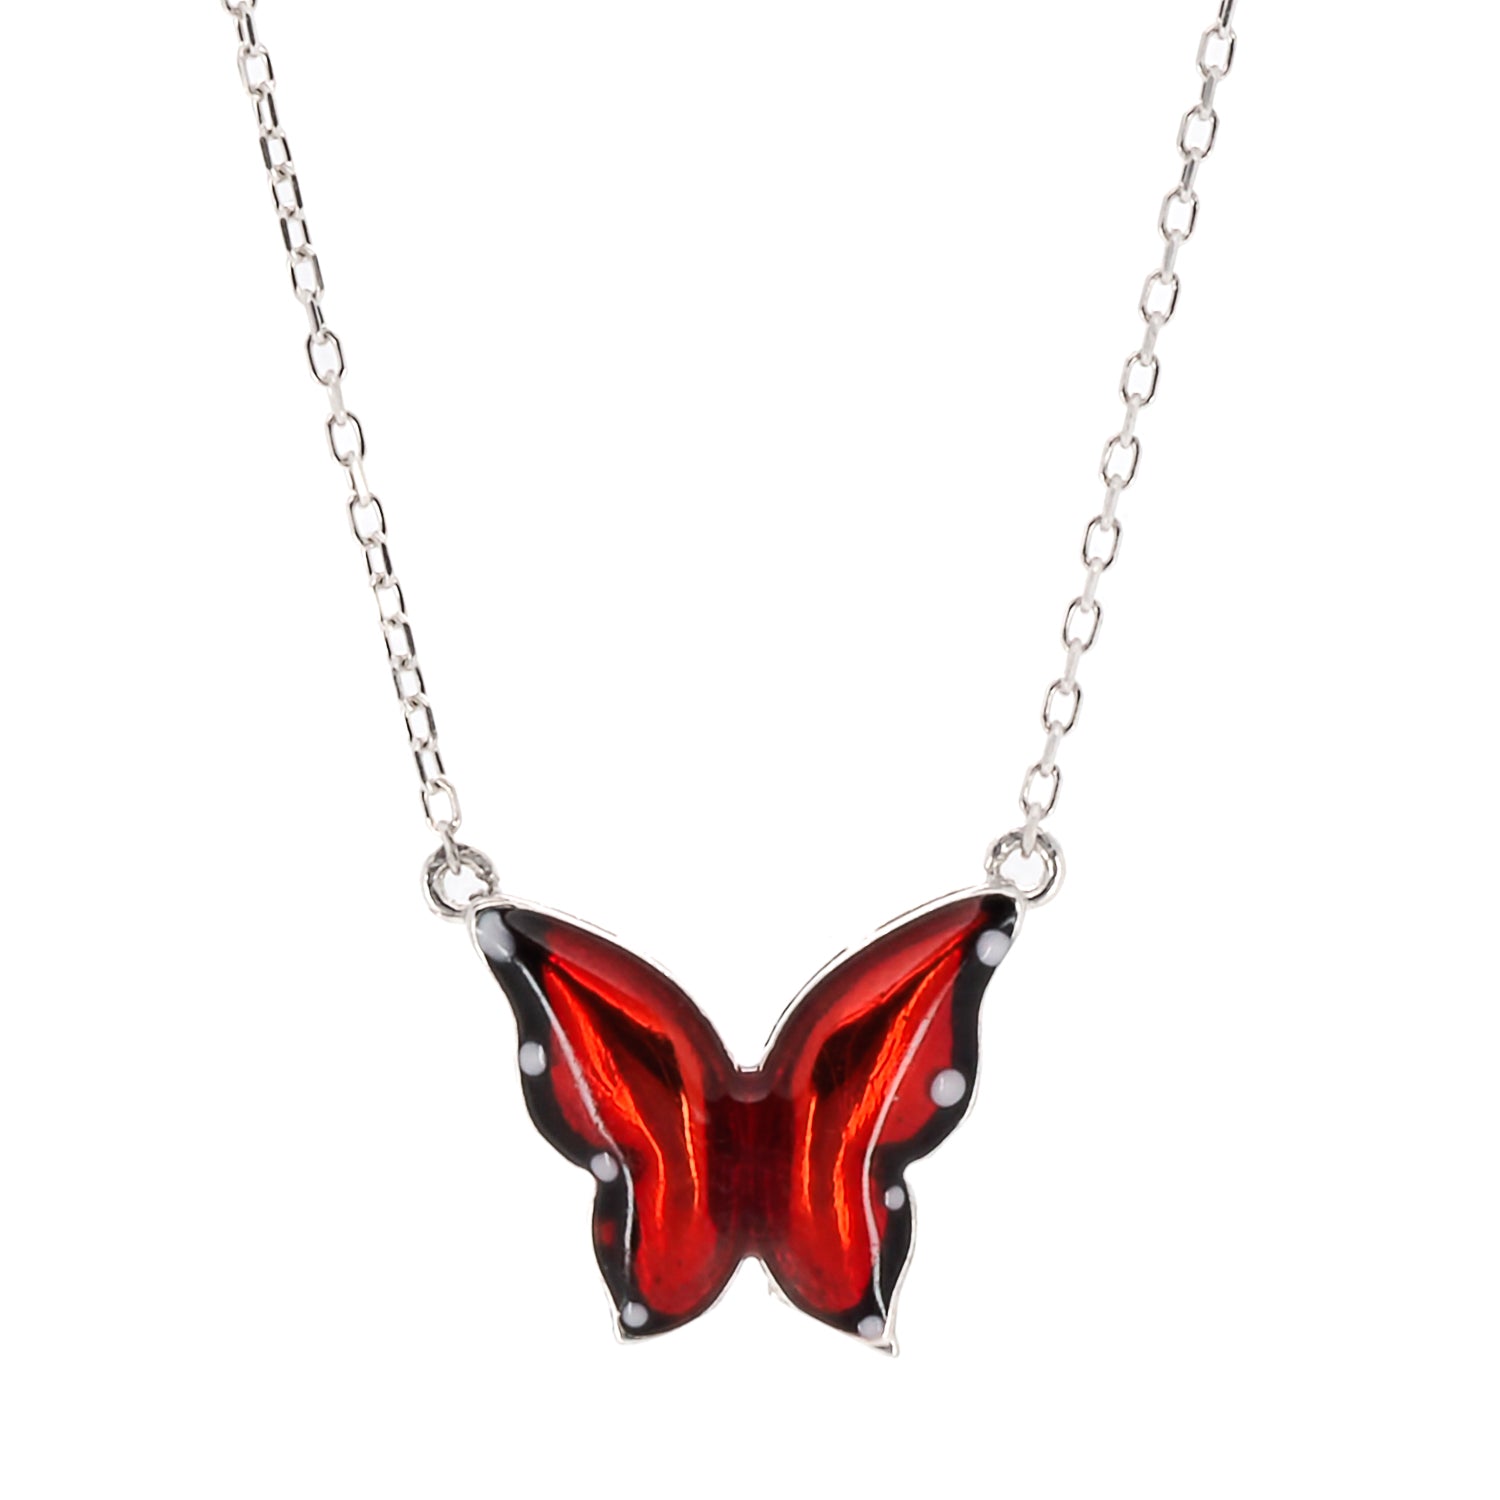 Silver Joy Red Enamel Butterfly Necklace featuring a captivating butterfly pendant with red enamel on a 925 sterling silver chain.